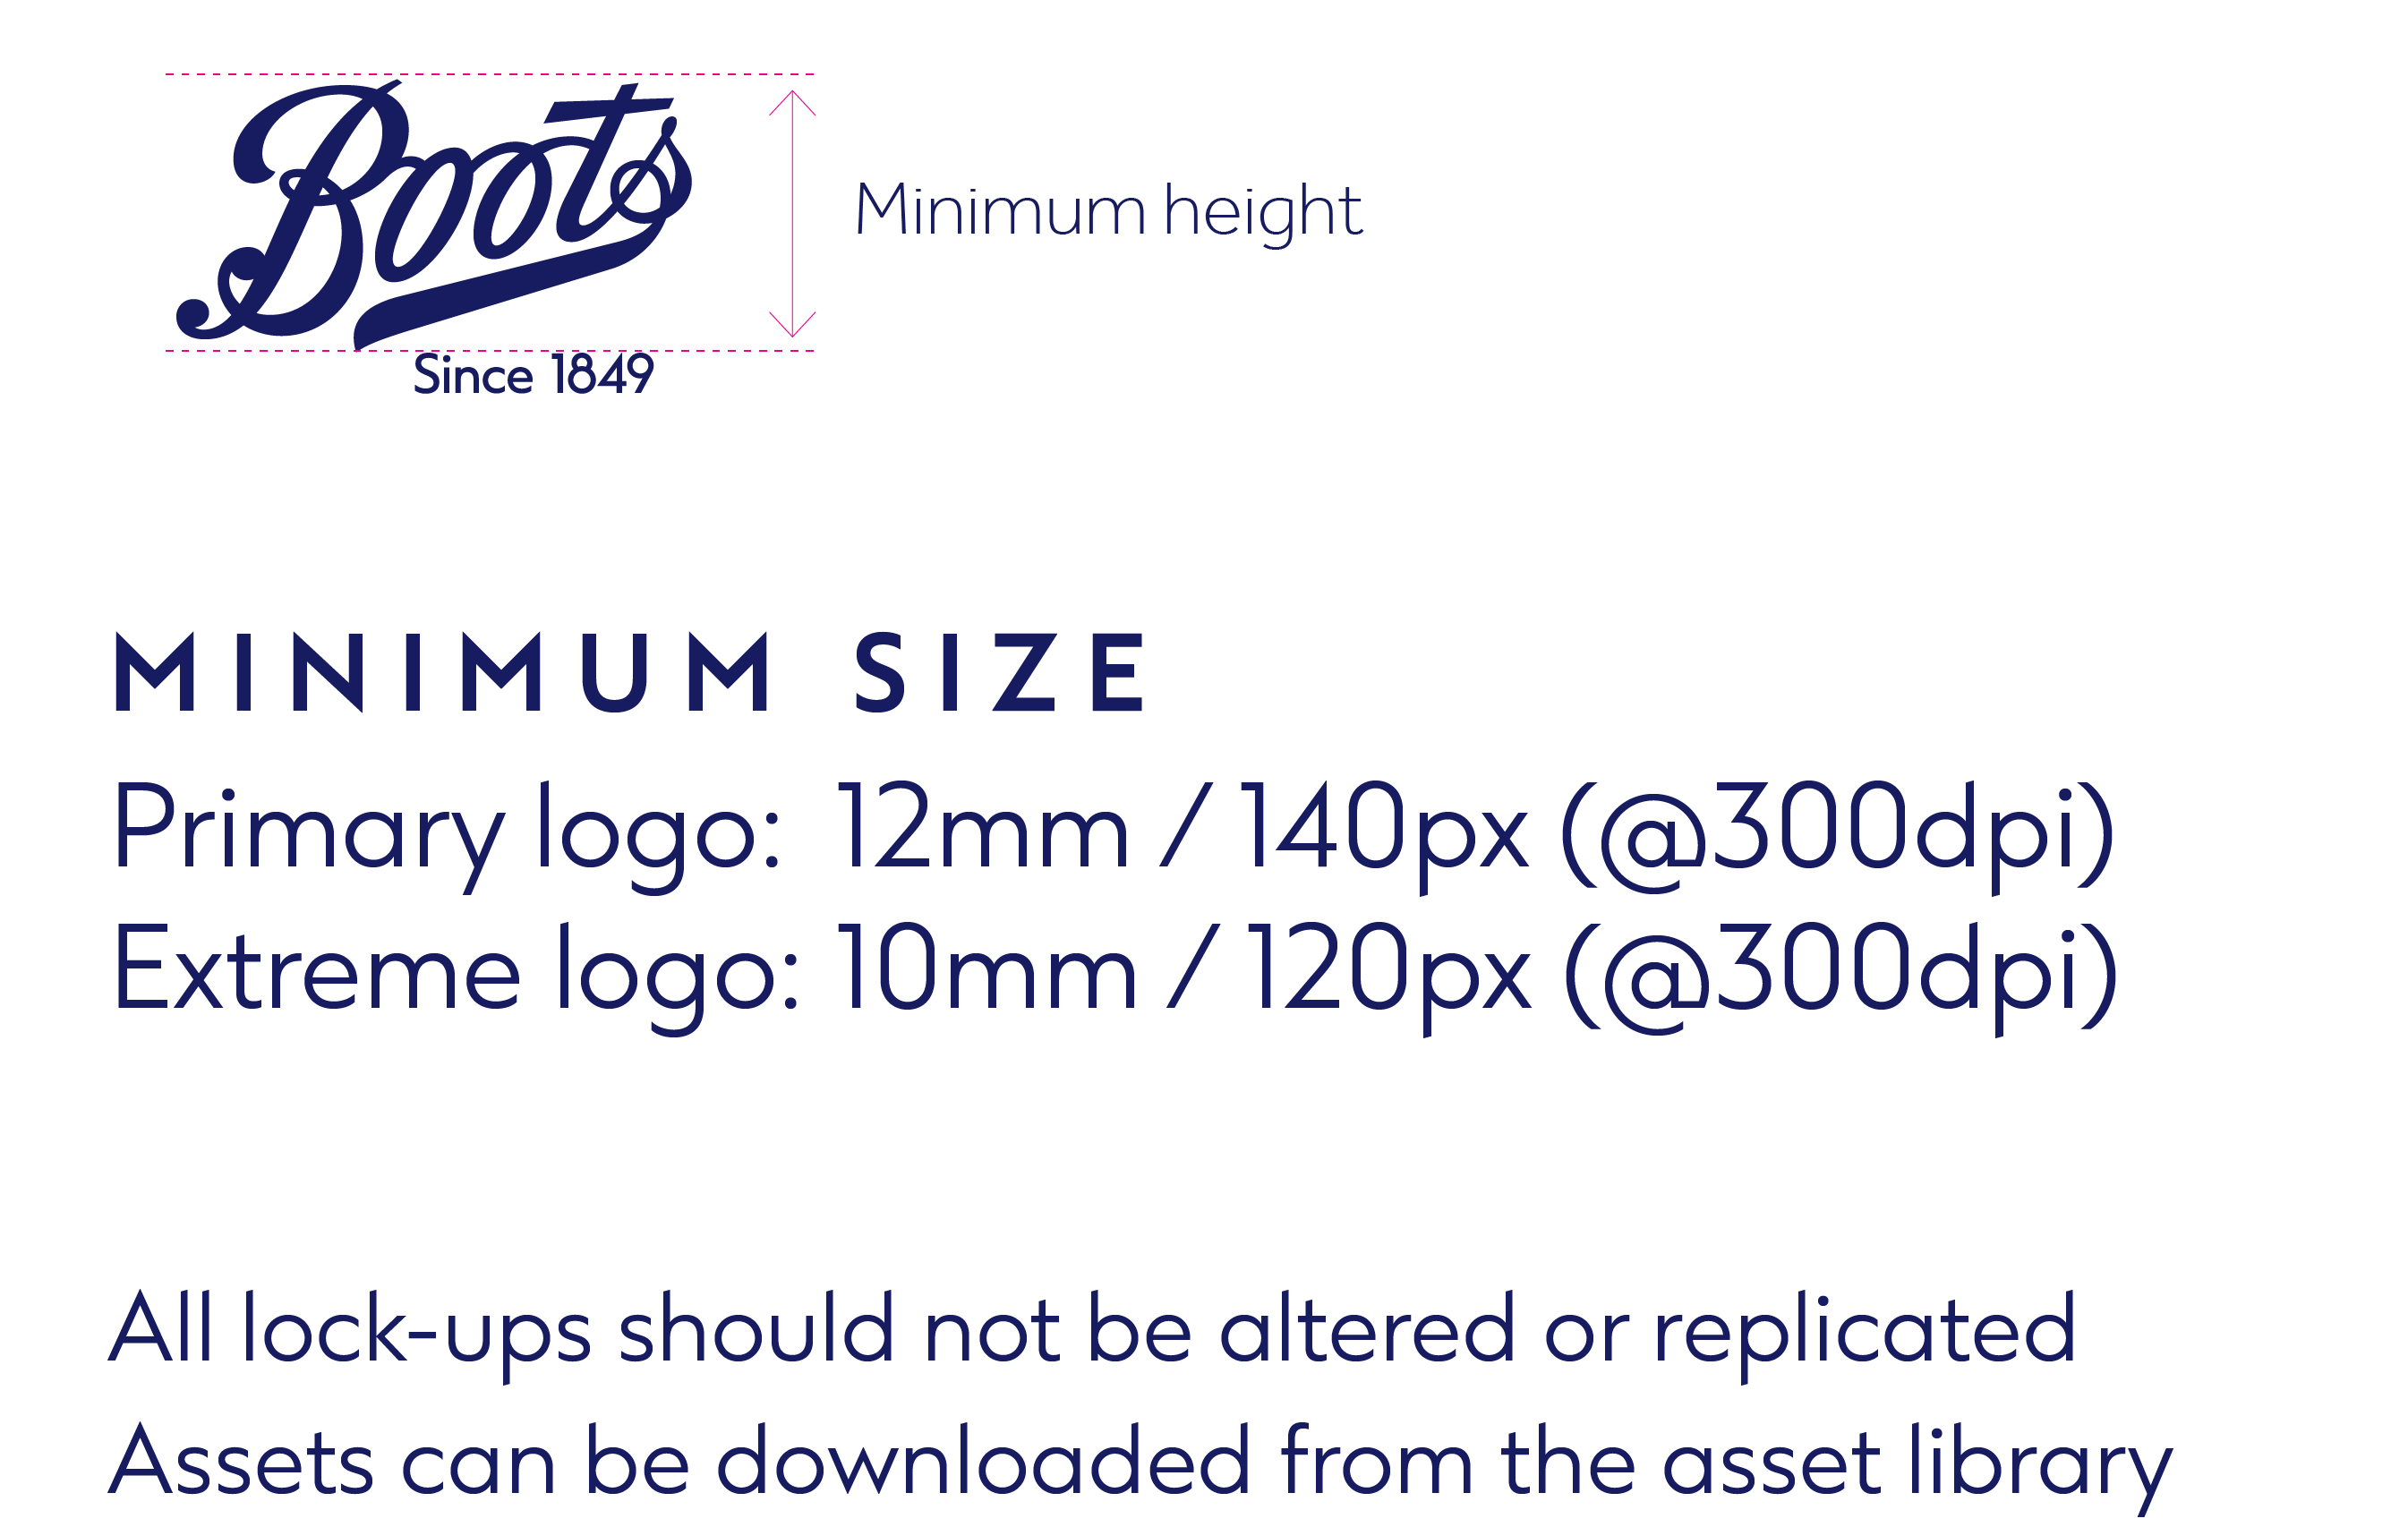 boots-min-size